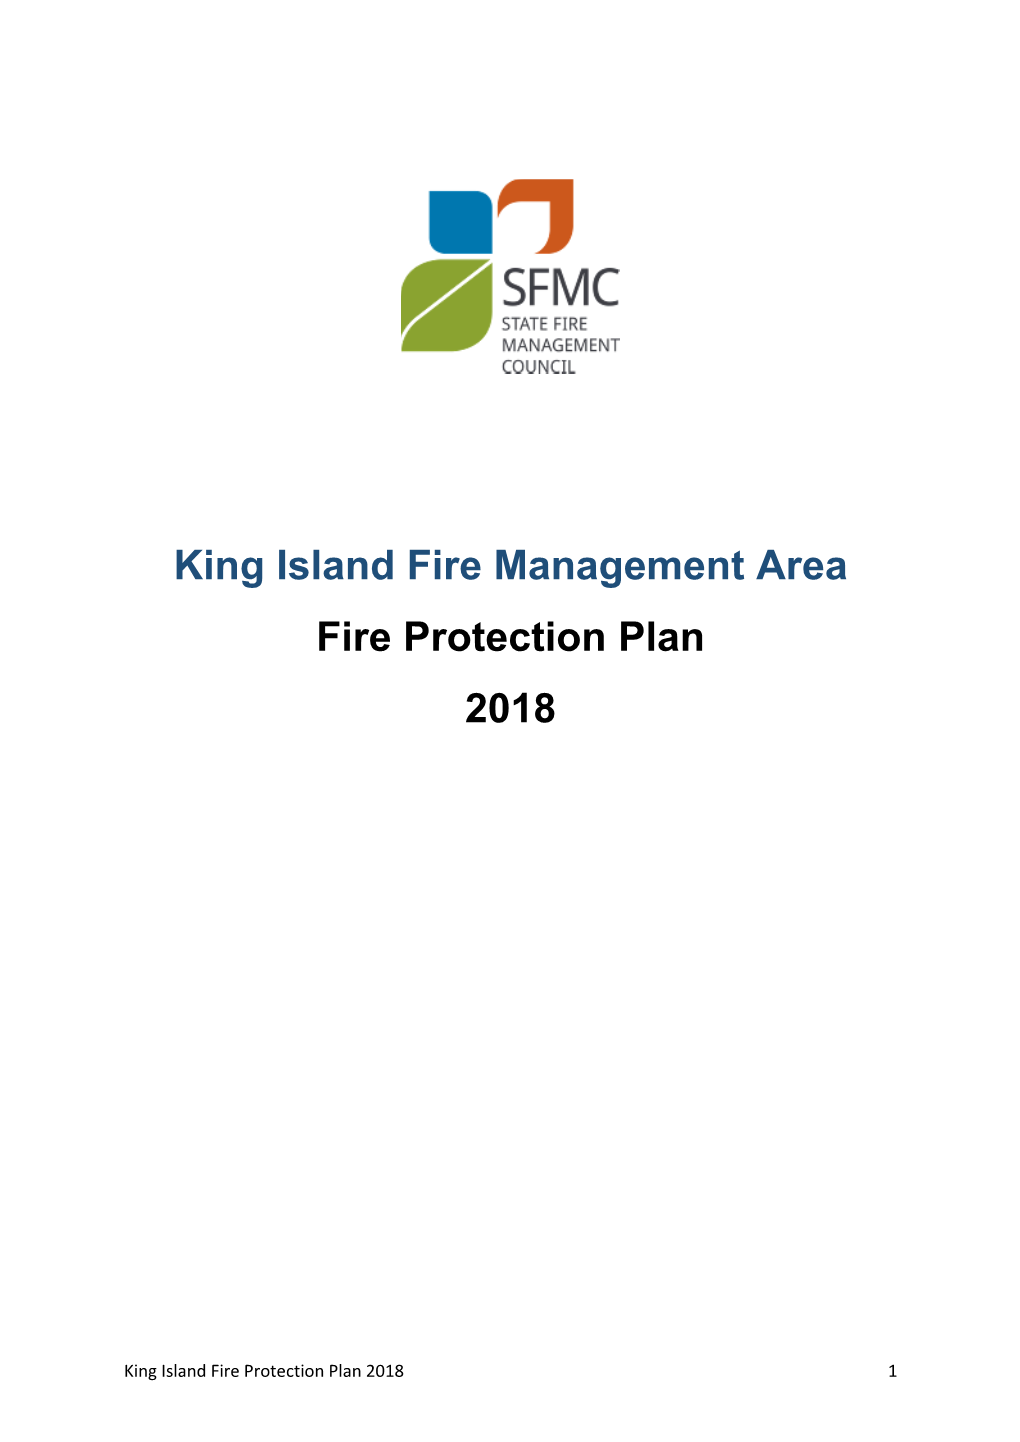 King Island Fire Management Area Fire Protection Plan 2018